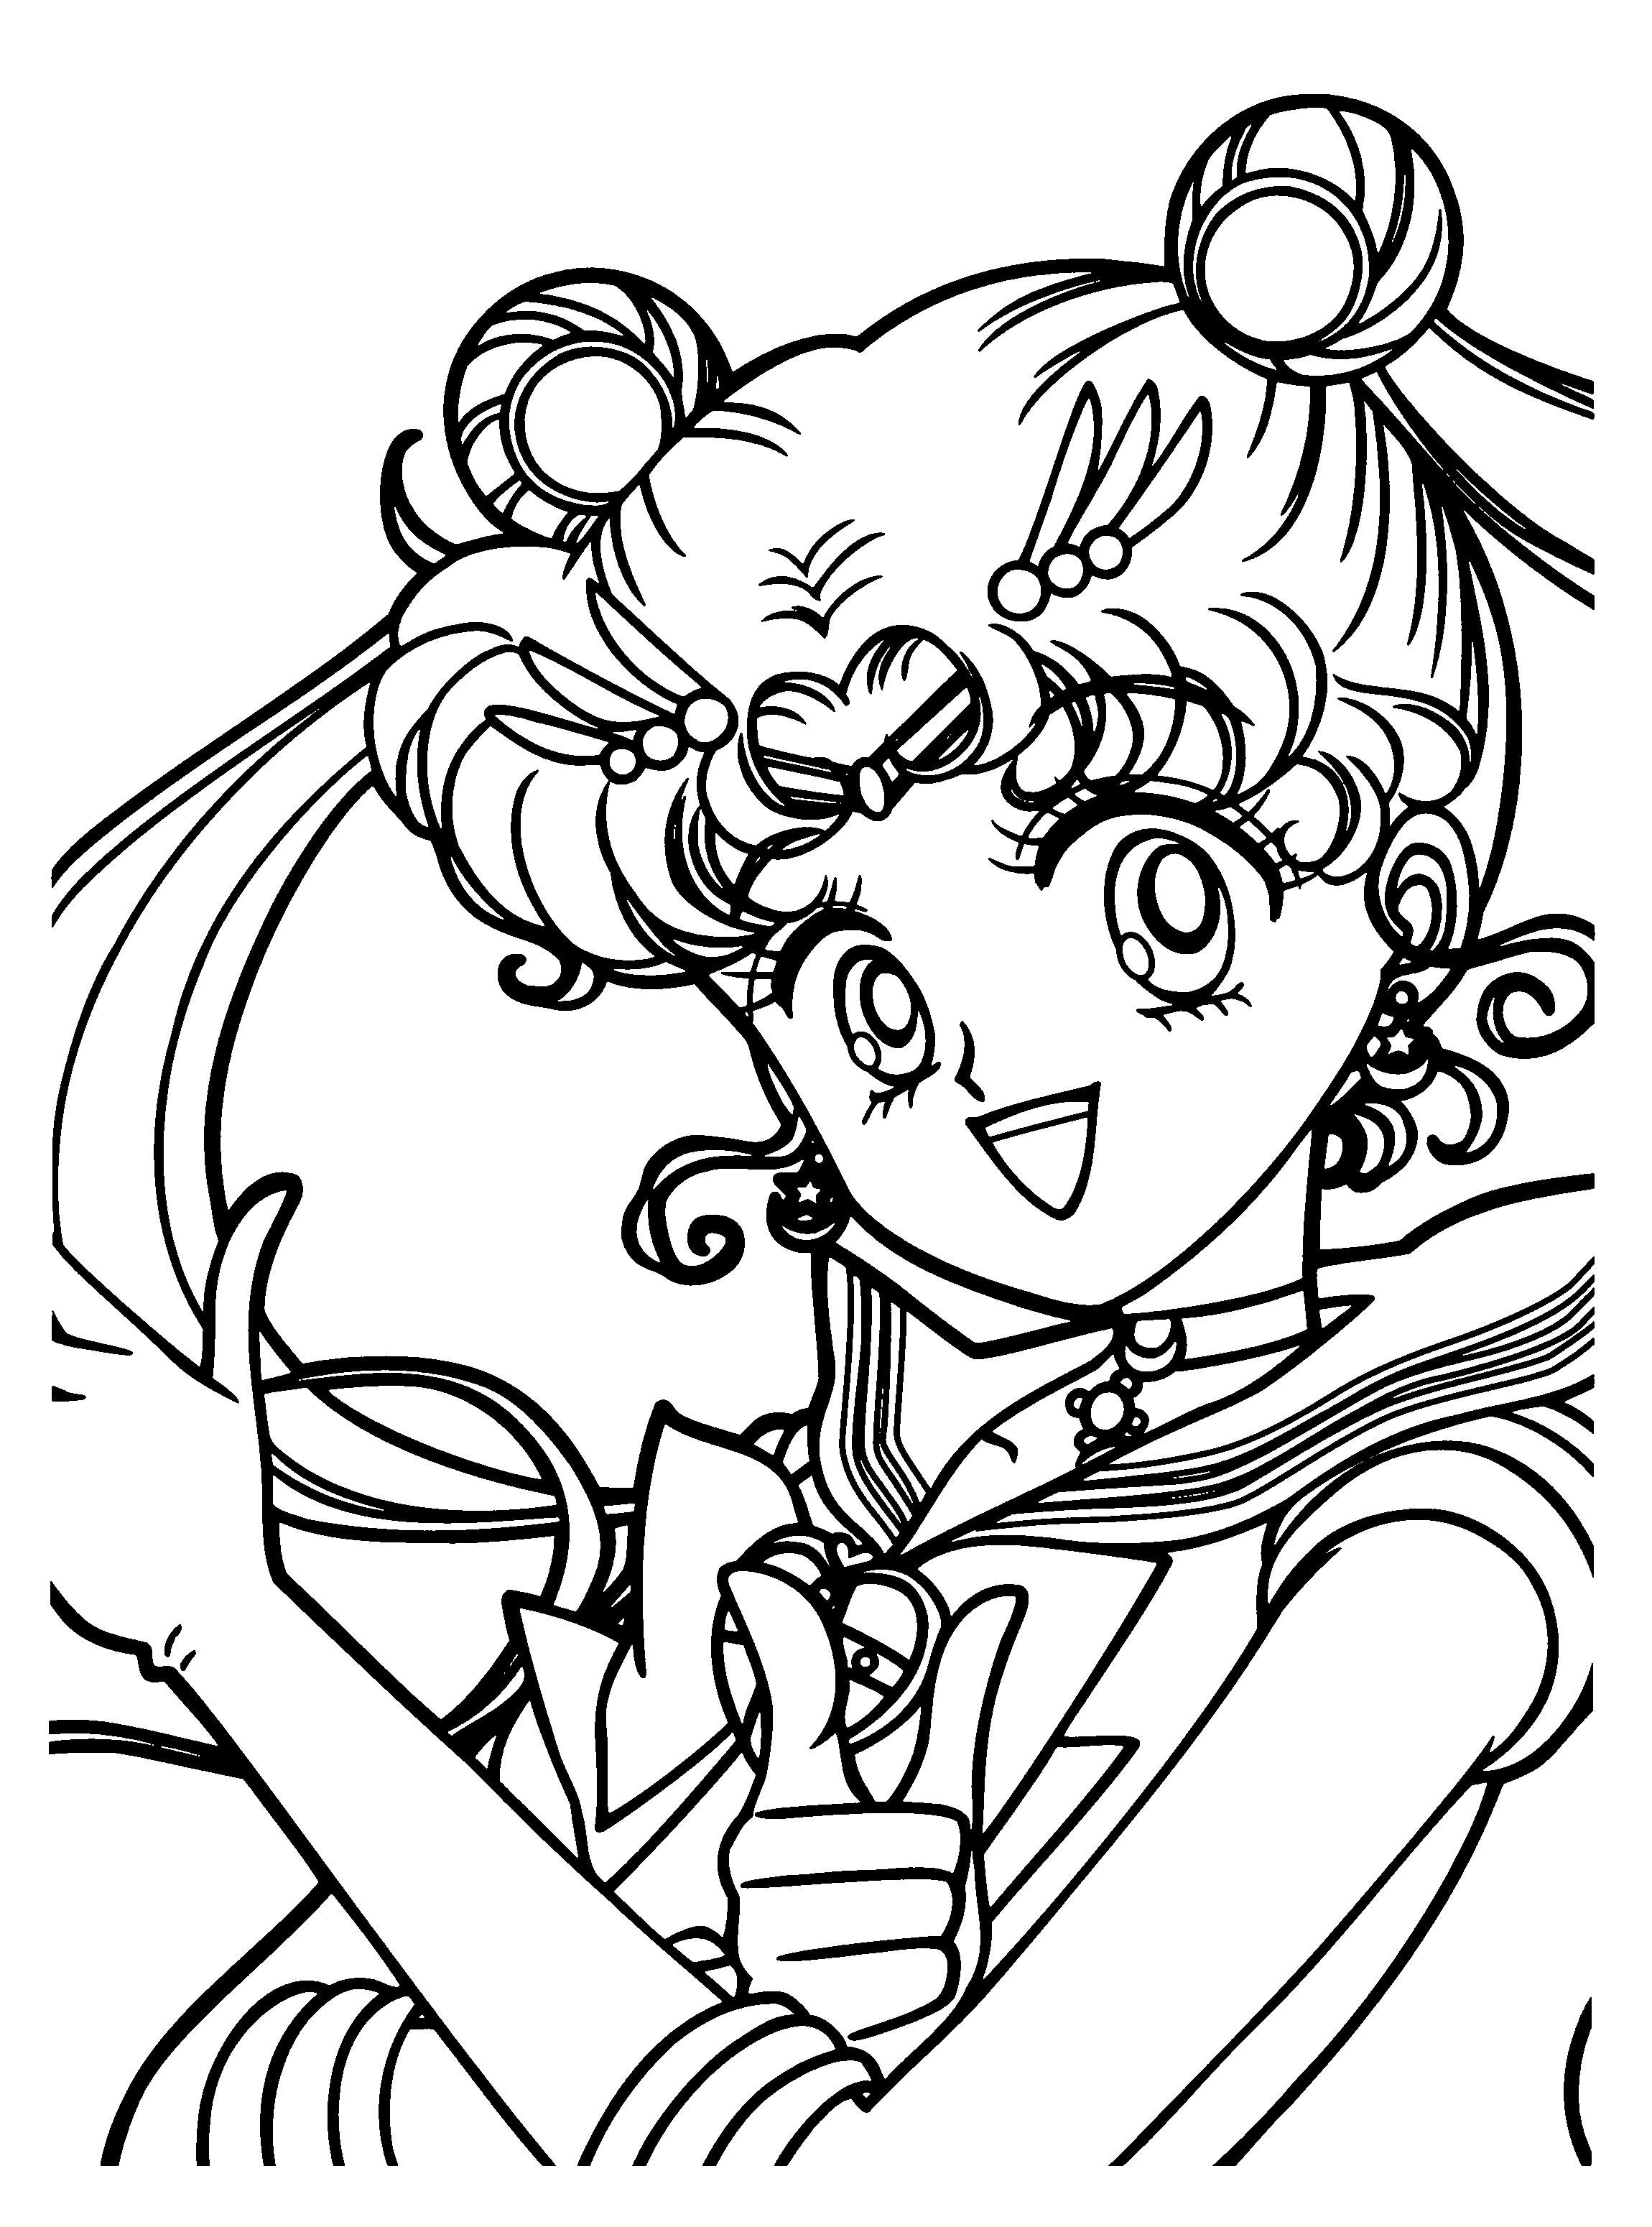 Sailor Moon Black and White Logo - Sailor Moon: Animated Image, Gifs, Picture